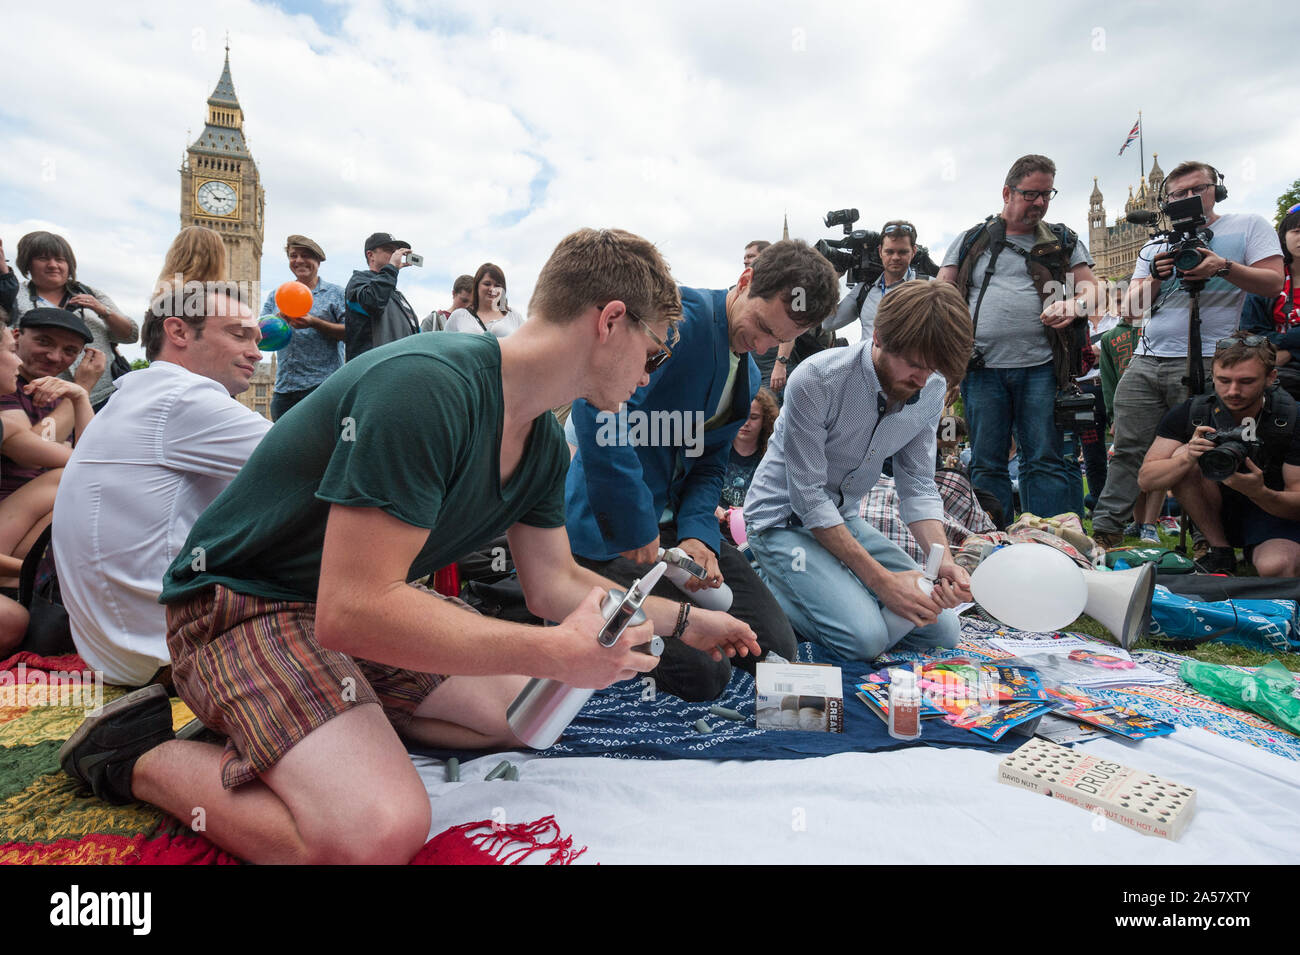 Parliament Square, London, UK. 1st August, 2015. About 50 pro psychoactive substance activists gather in Parliament Square in London to inhale nitrous Stock Photo